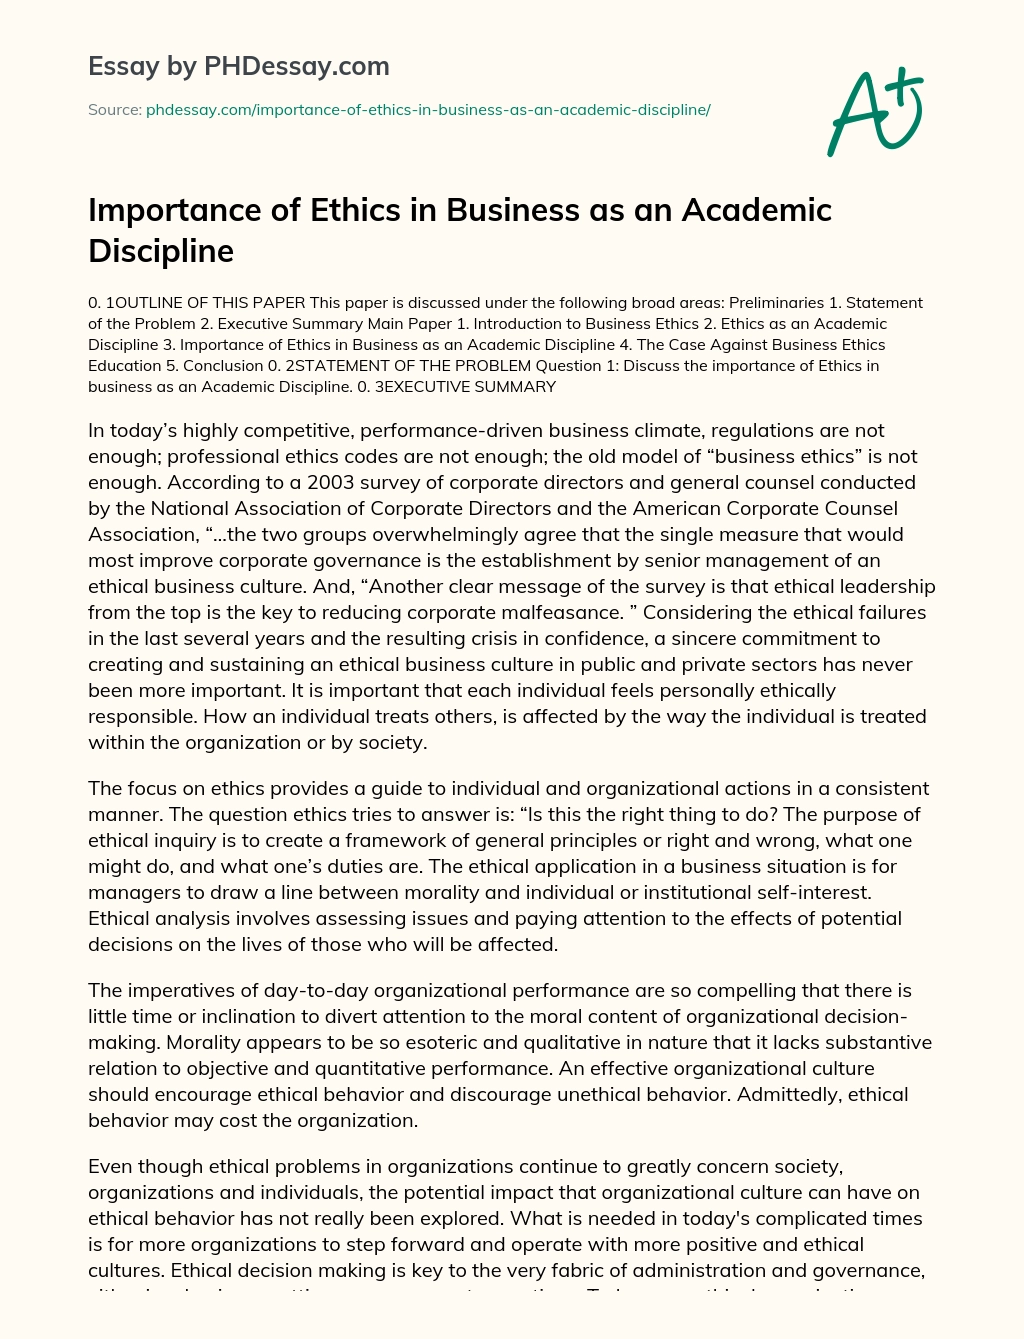 Importance of Ethics in Business as an Academic Discipline essay